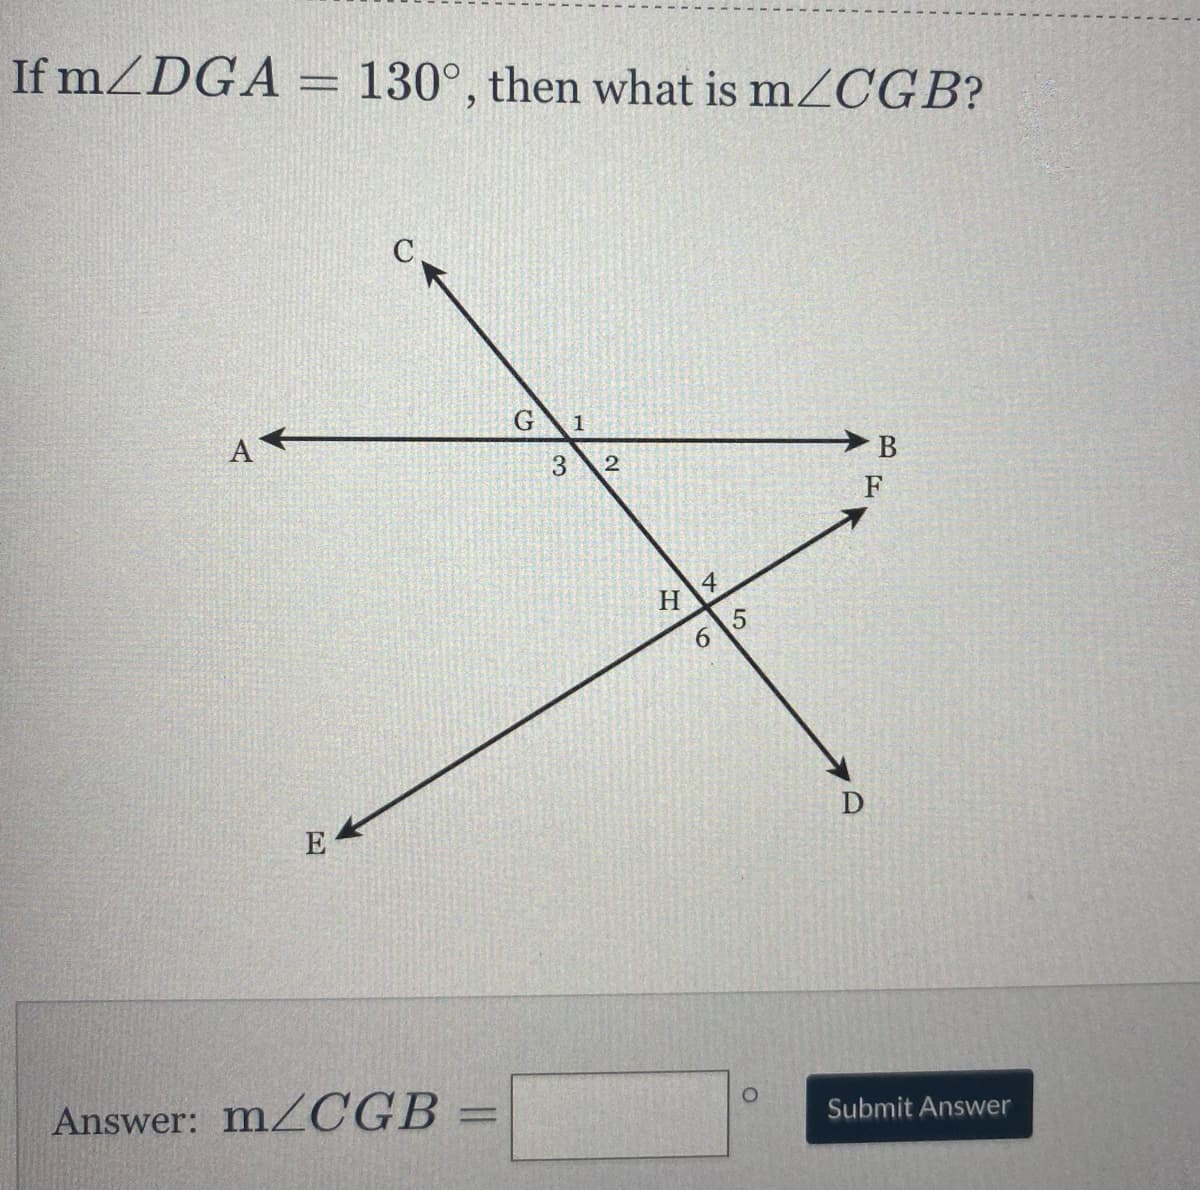 If mZDGA = 130°, then what is mZCGB?
%3D
6.
1
2
F
4
H
6.
E
Answer: MZCGB
%3D
Submit Answer
